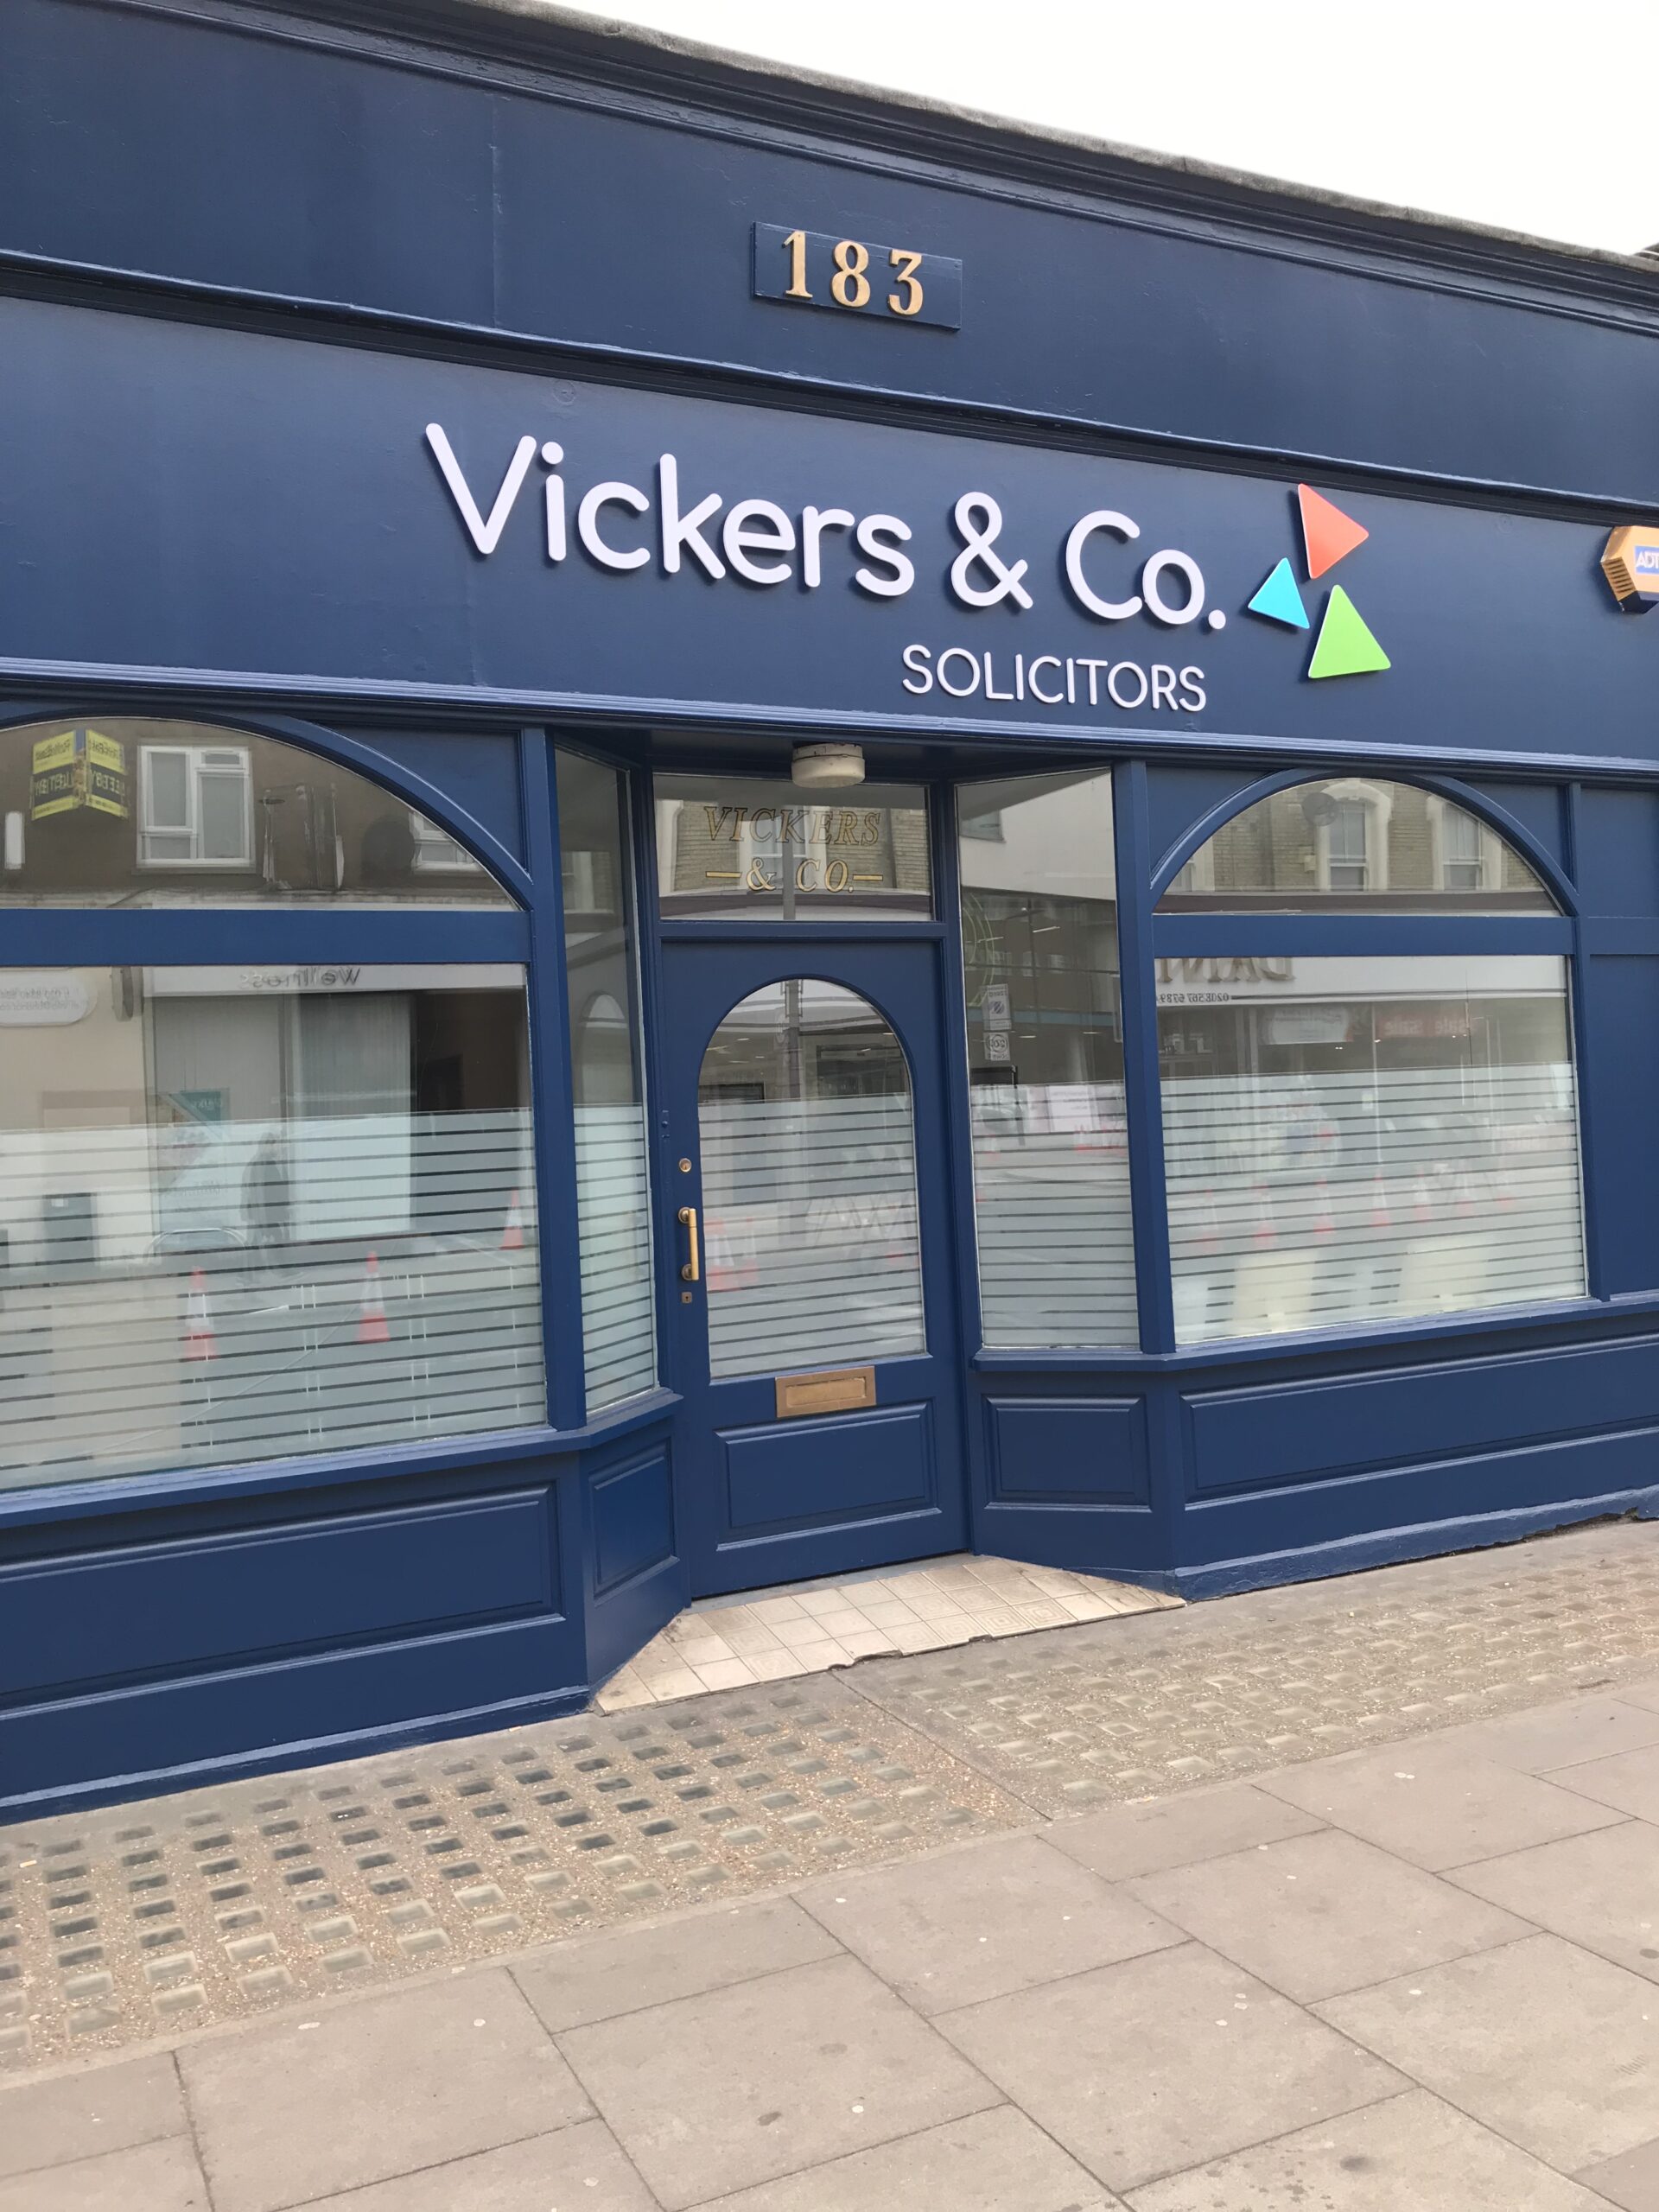 Vickers & Co